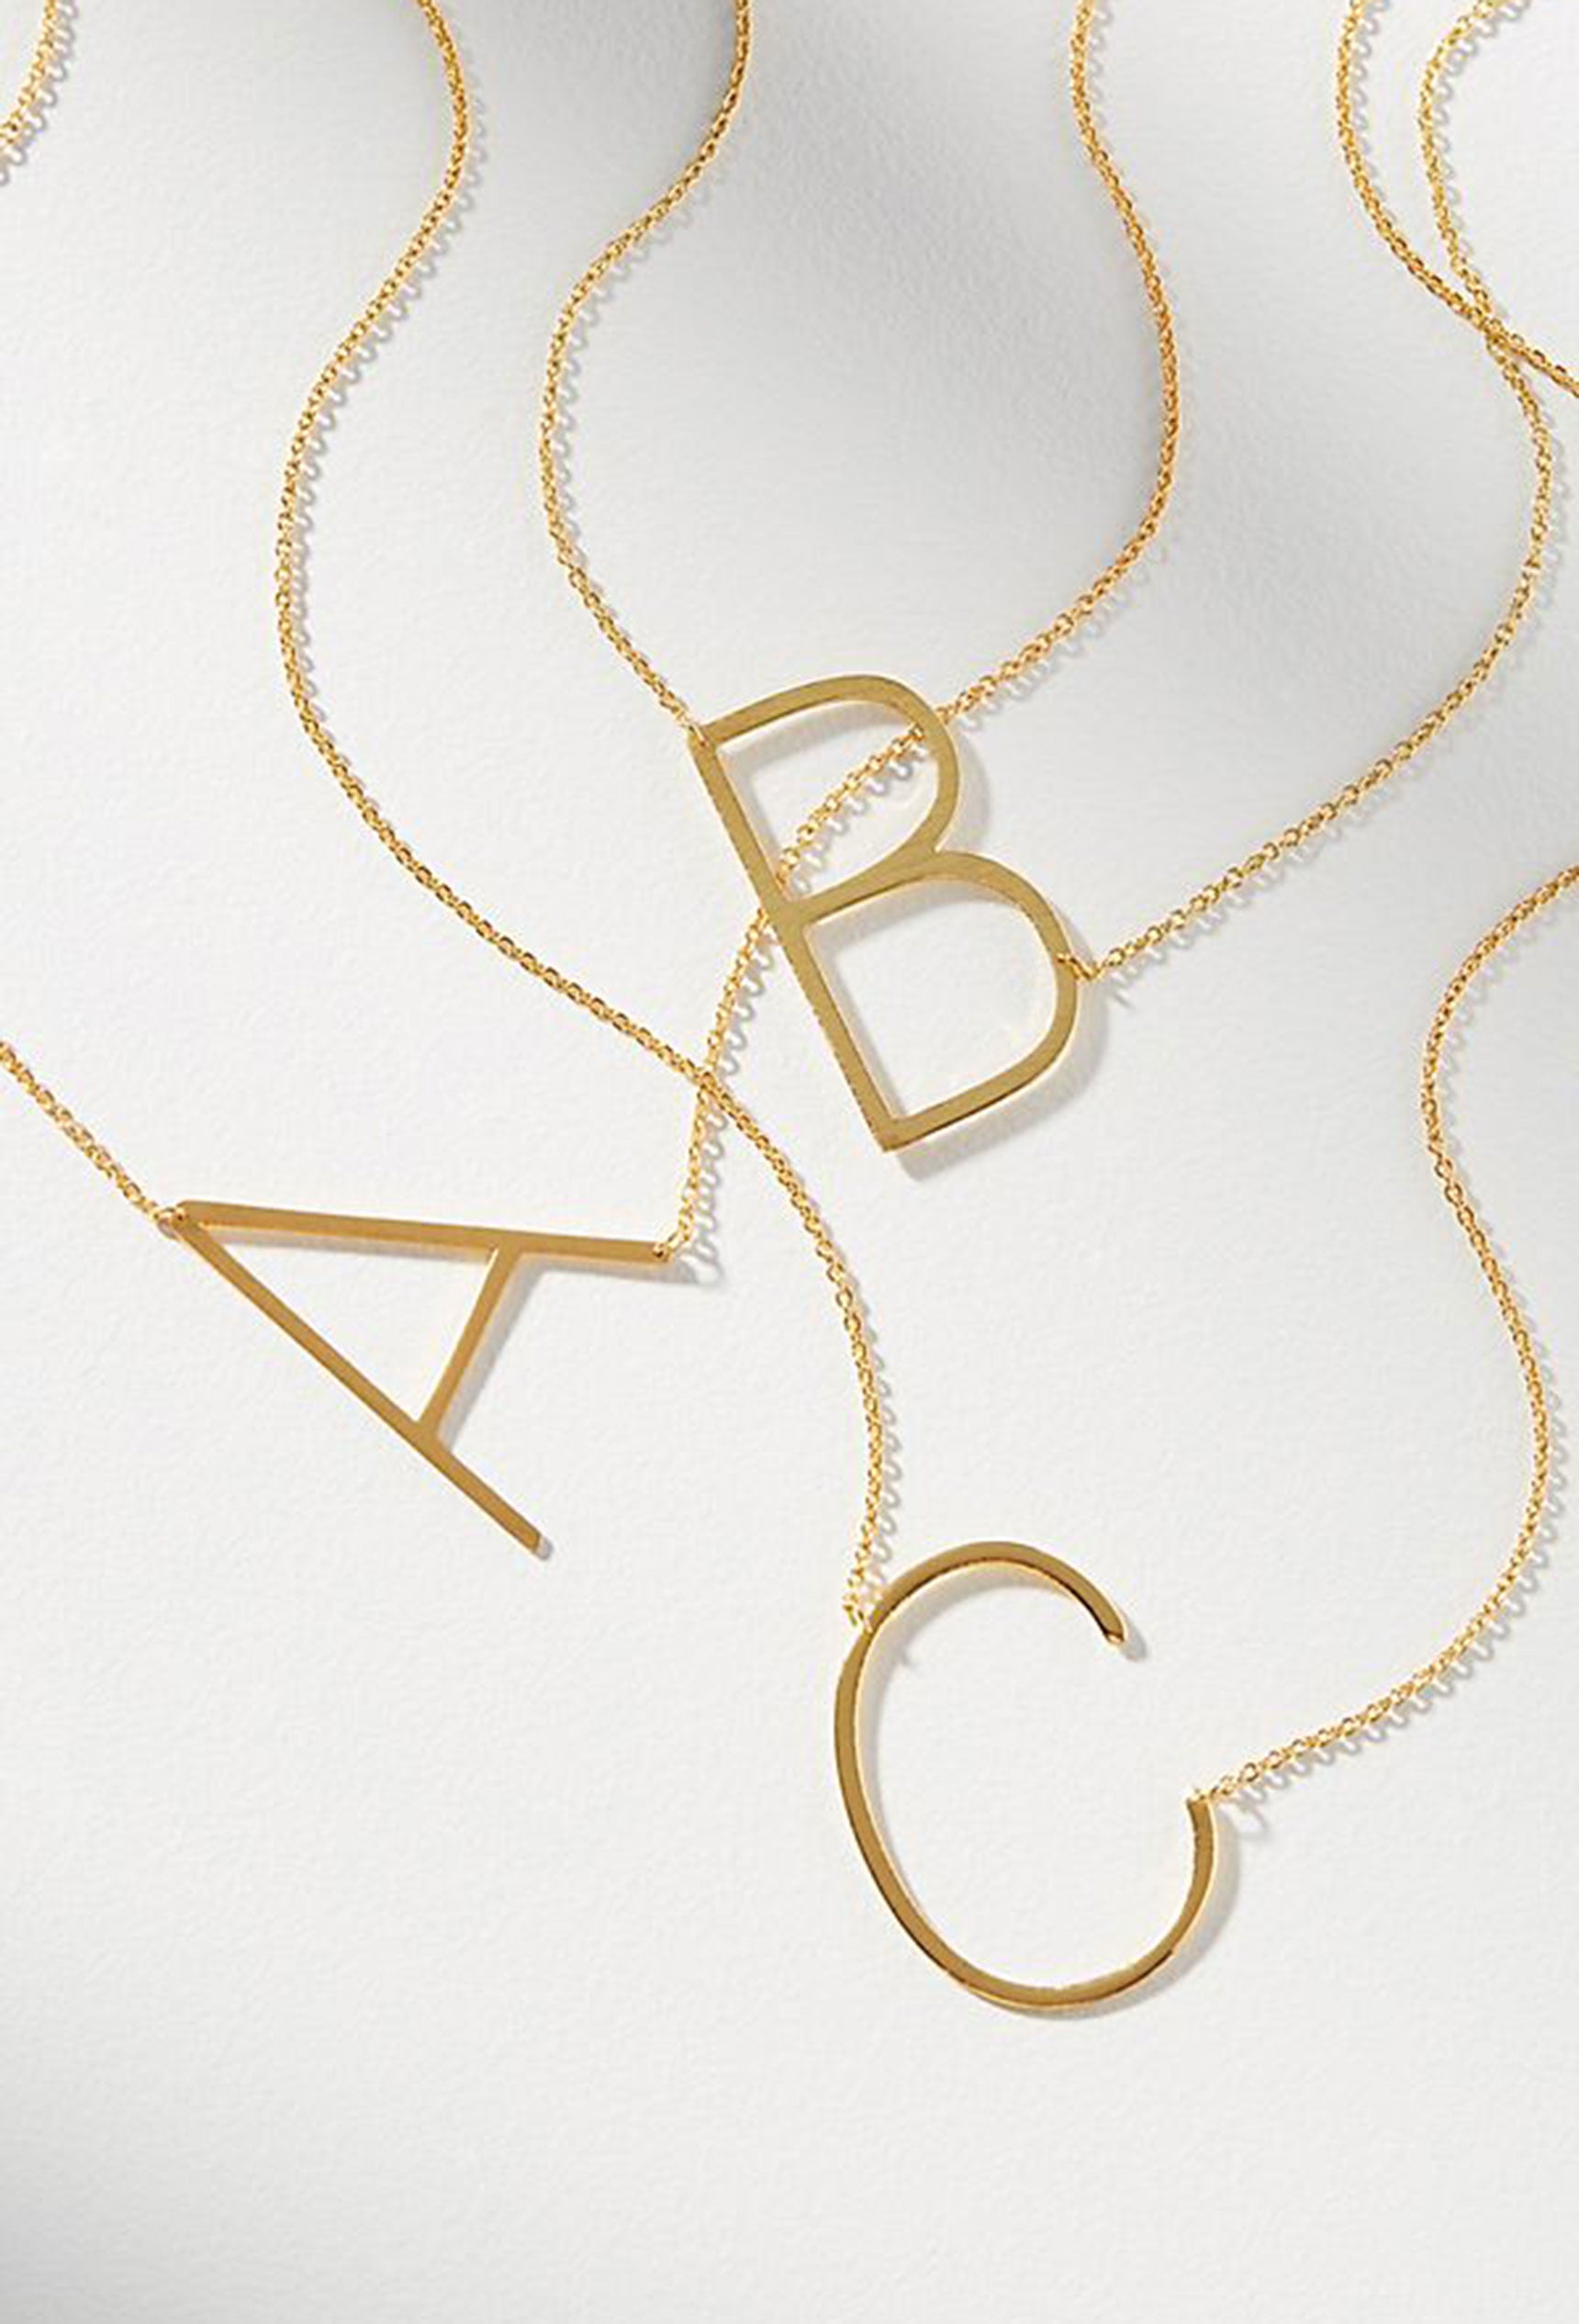 Uppercase Block Letter Charm Name Necklace in Sterling Silver with 14K Gold  Plate (1 Line) | Zales